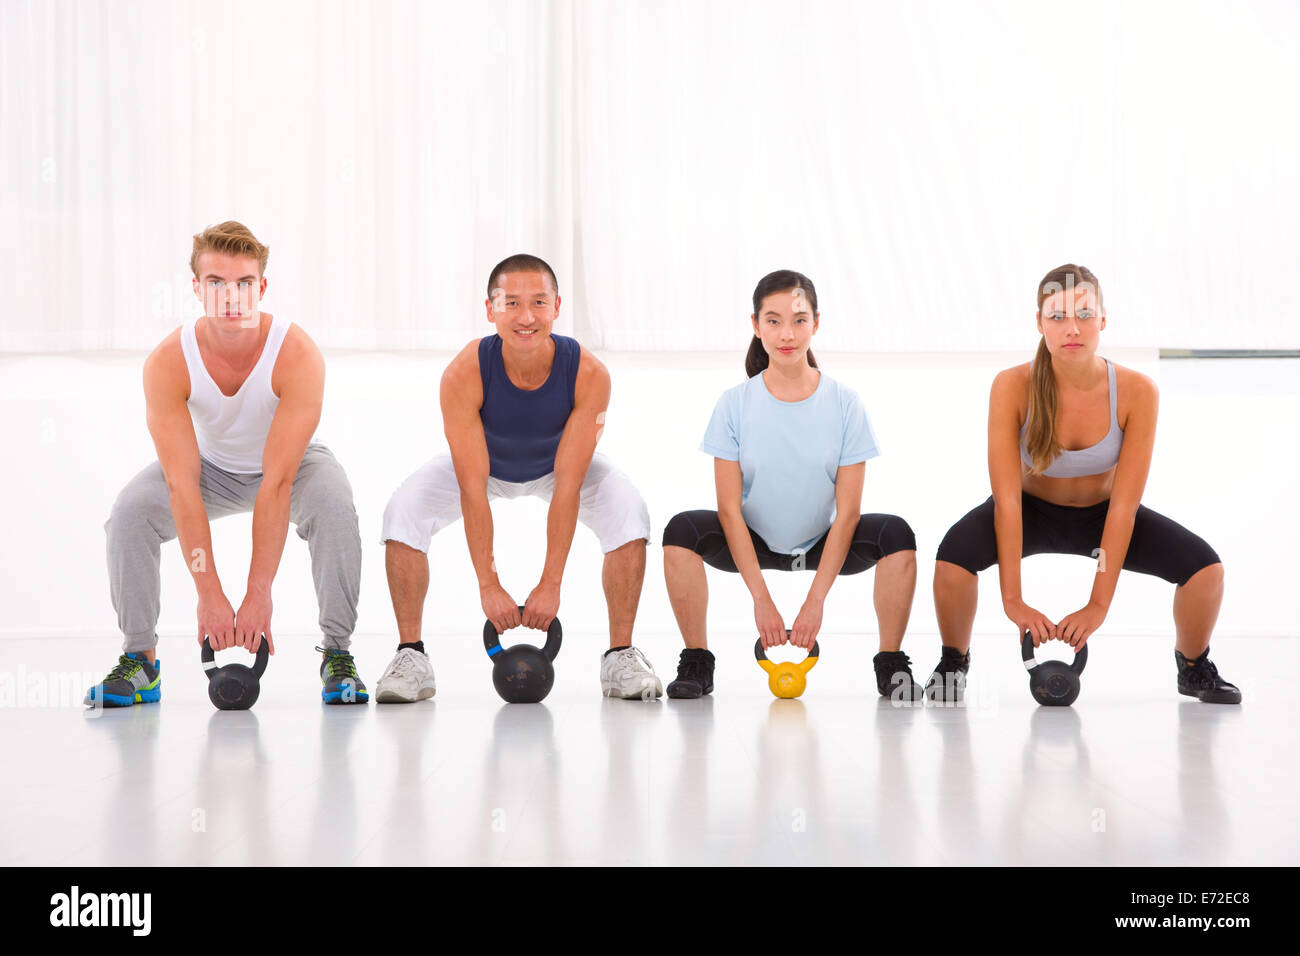 Multiethnic group of people doing kettlebell crossfit exercise Stock Photo